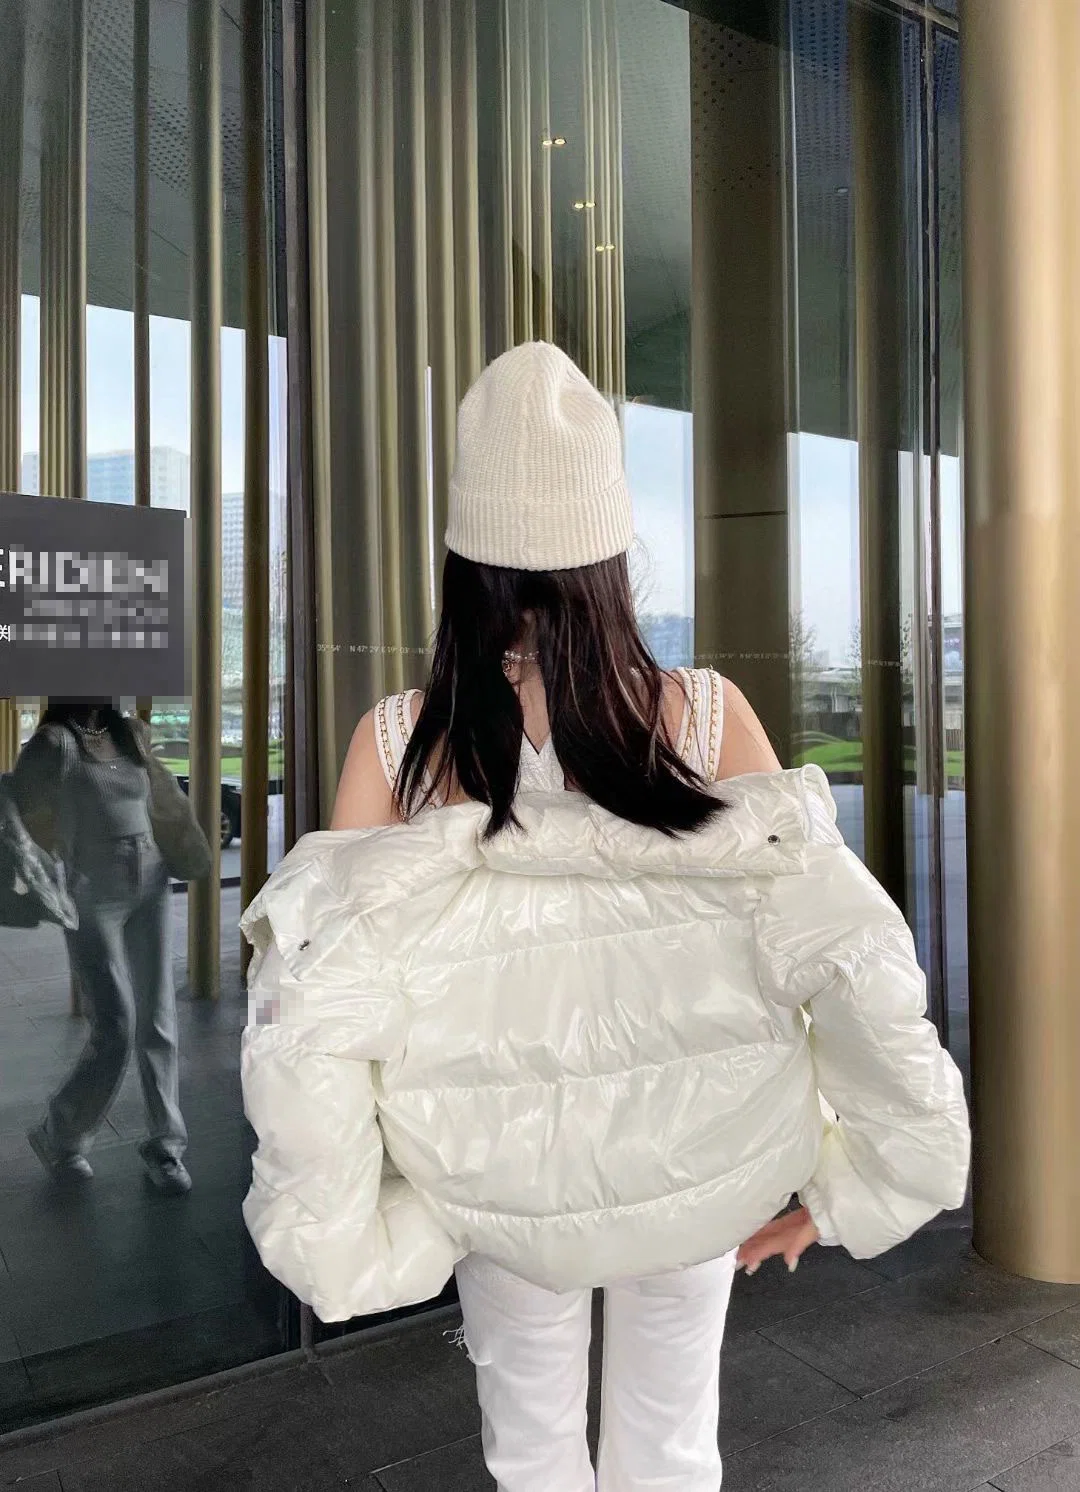 Zonxan Wholesale/Supplier Designer Brand Winter Thick Down Jacket White Duck Down Casual Ladies Warm Coat Jacket Coat Women&prime; S Clothes. Patent Leather Ultralight